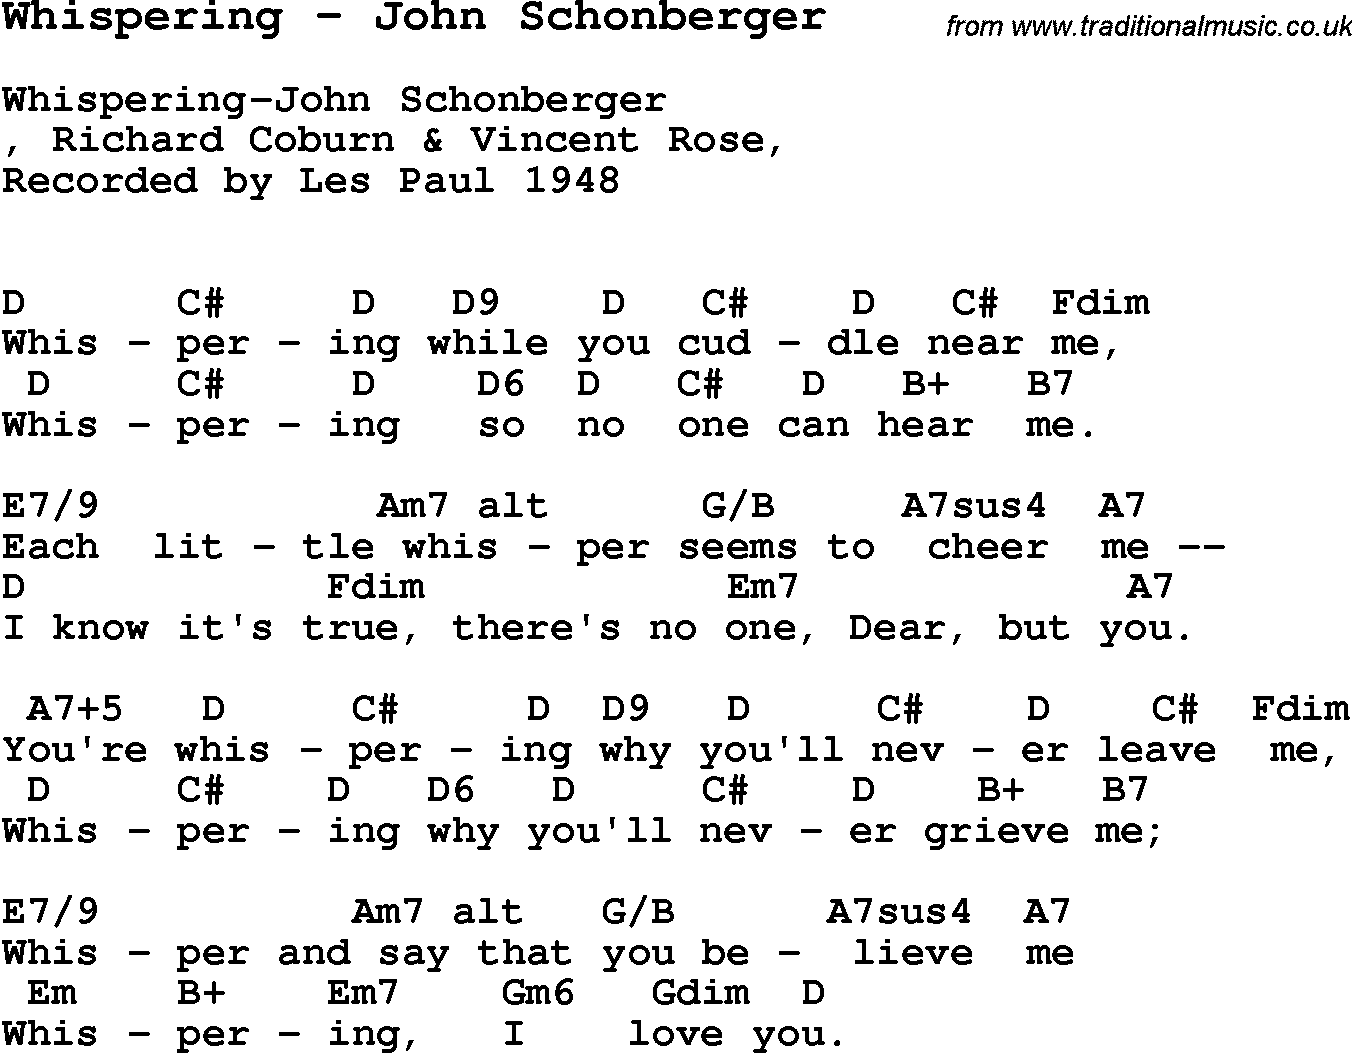 Song Whispering by John Schonberger, with lyrics for vocal performance and accompaniment chords for Ukulele, Guitar Banjo etc.